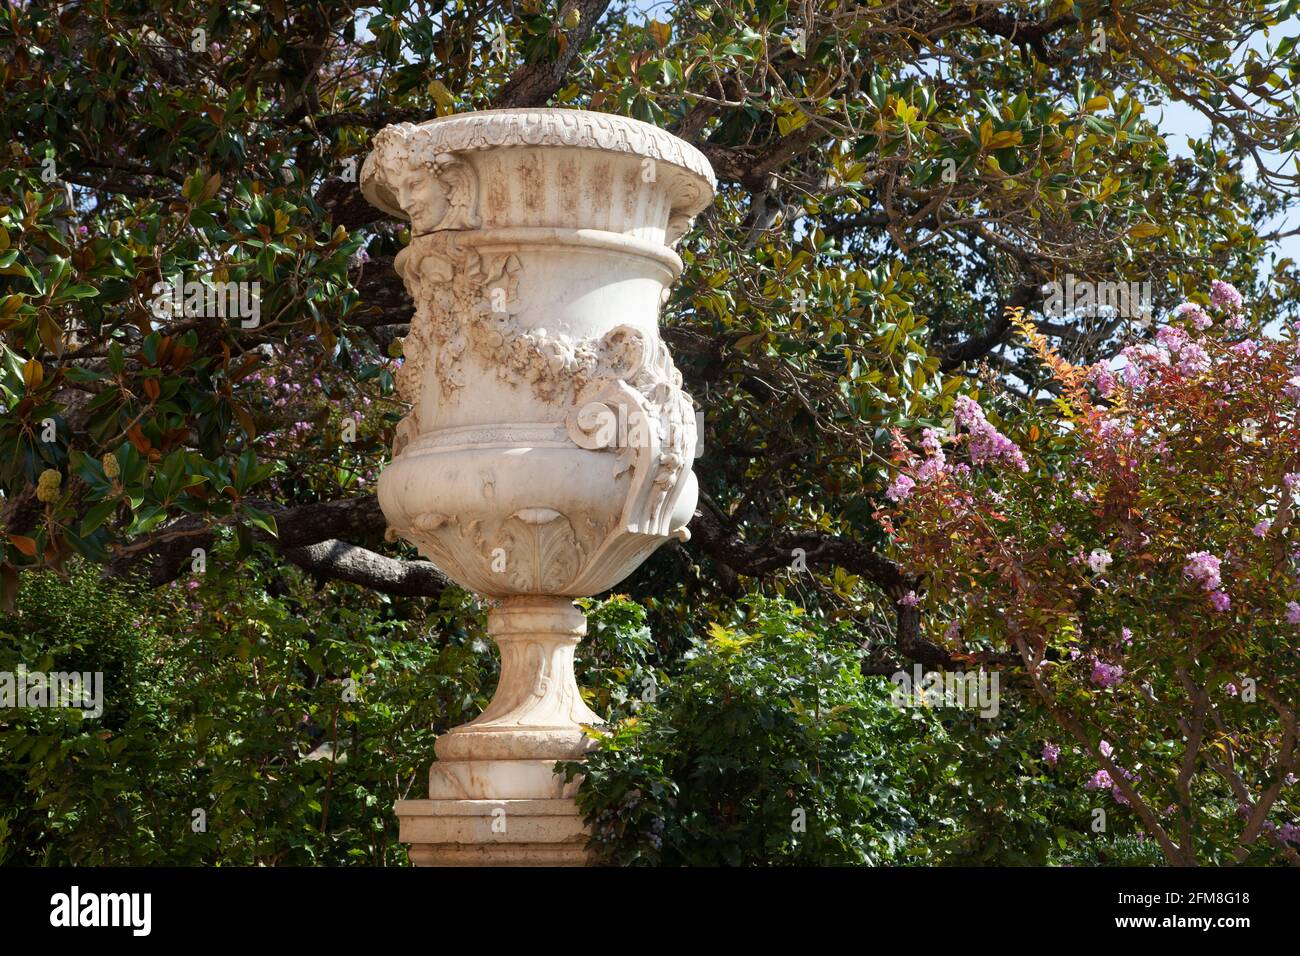 Decorations of the gardens of Aranjuez in Madrid Stock Photo